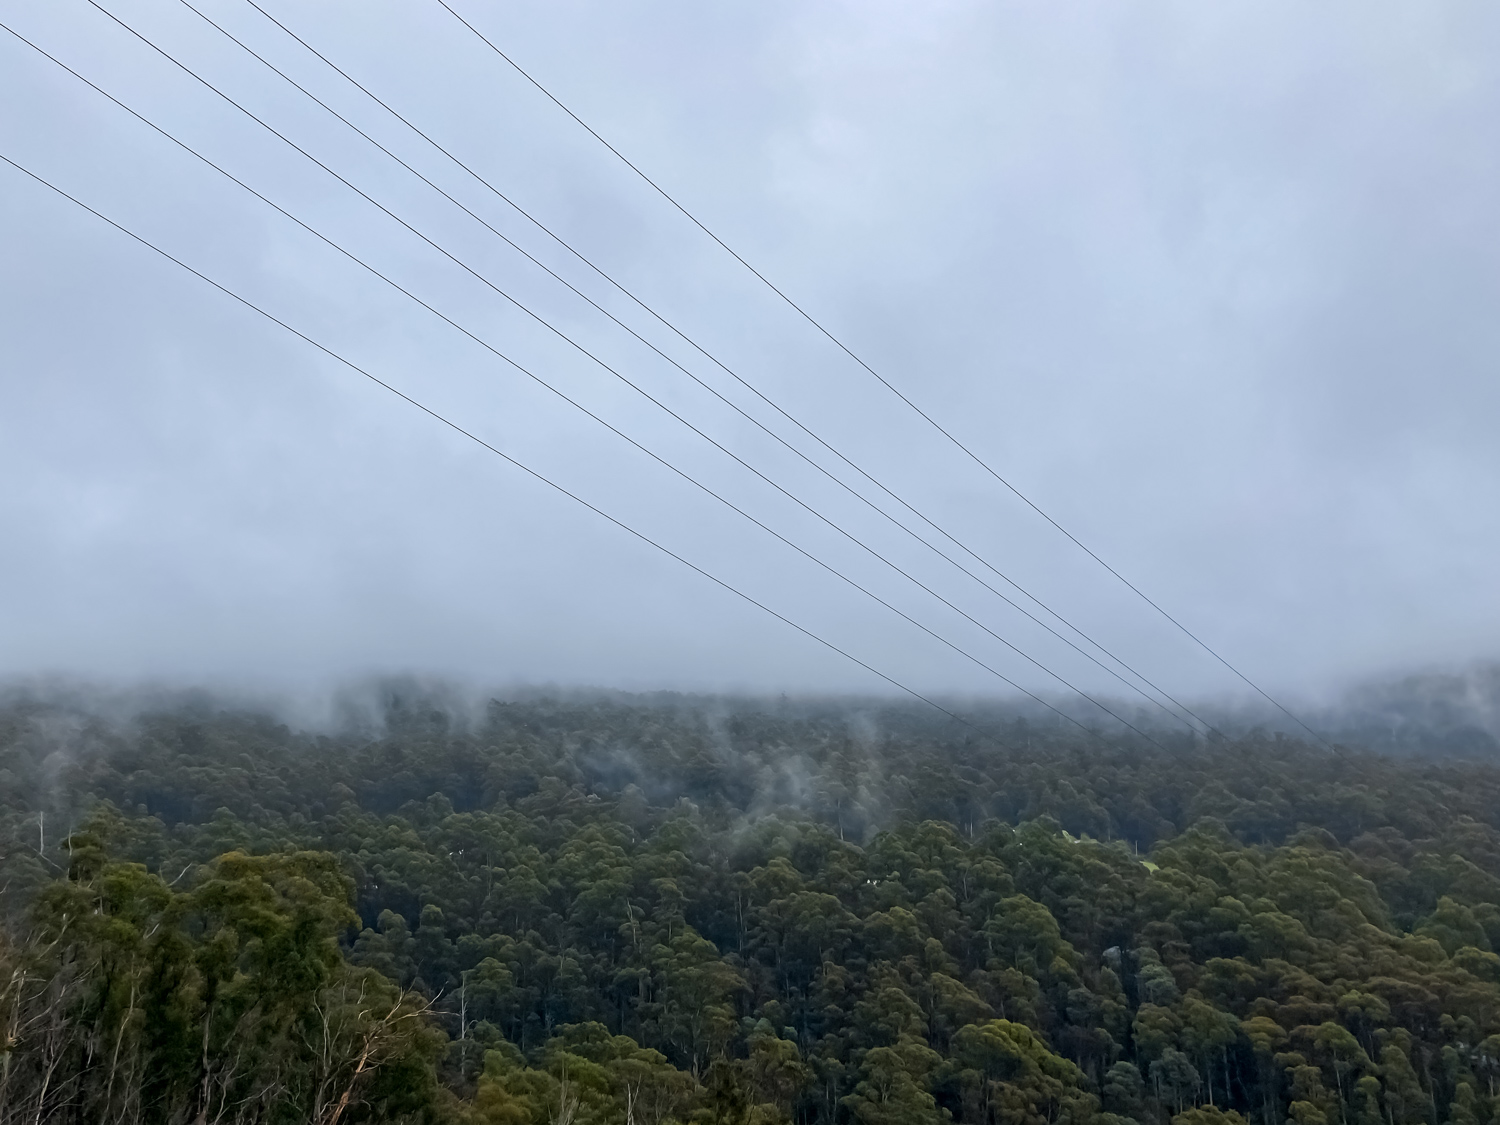 Dense cloud hides the mountain. All we can see are trees in the foreground